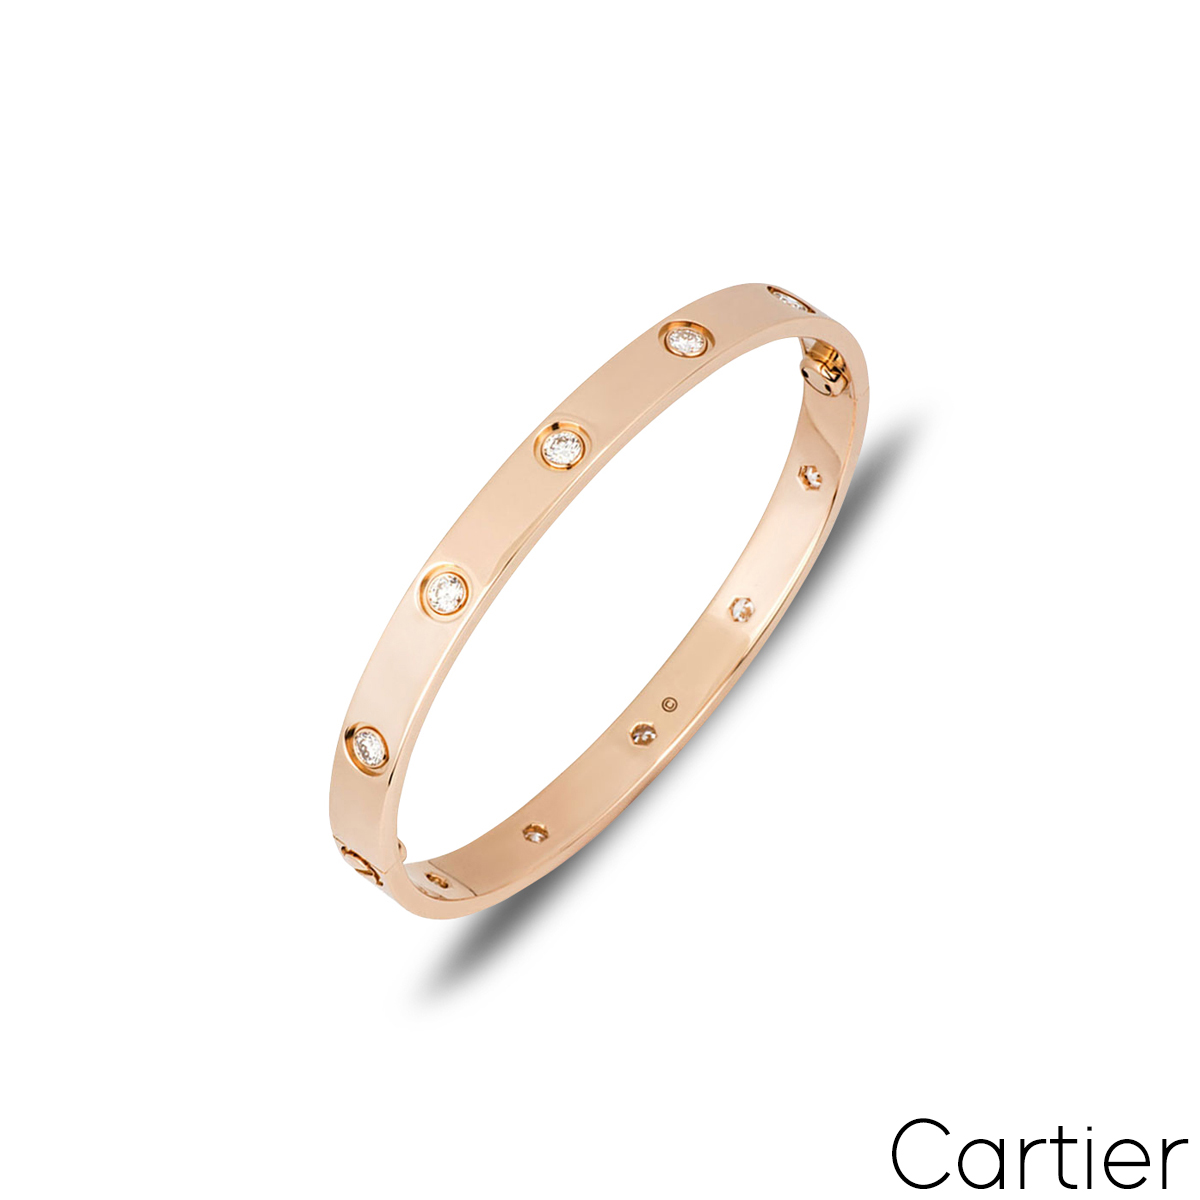 Cartier Love Bracelet 18ct yellow gold small size 16  New screw system Box   Certificates 2019 Model  About Time